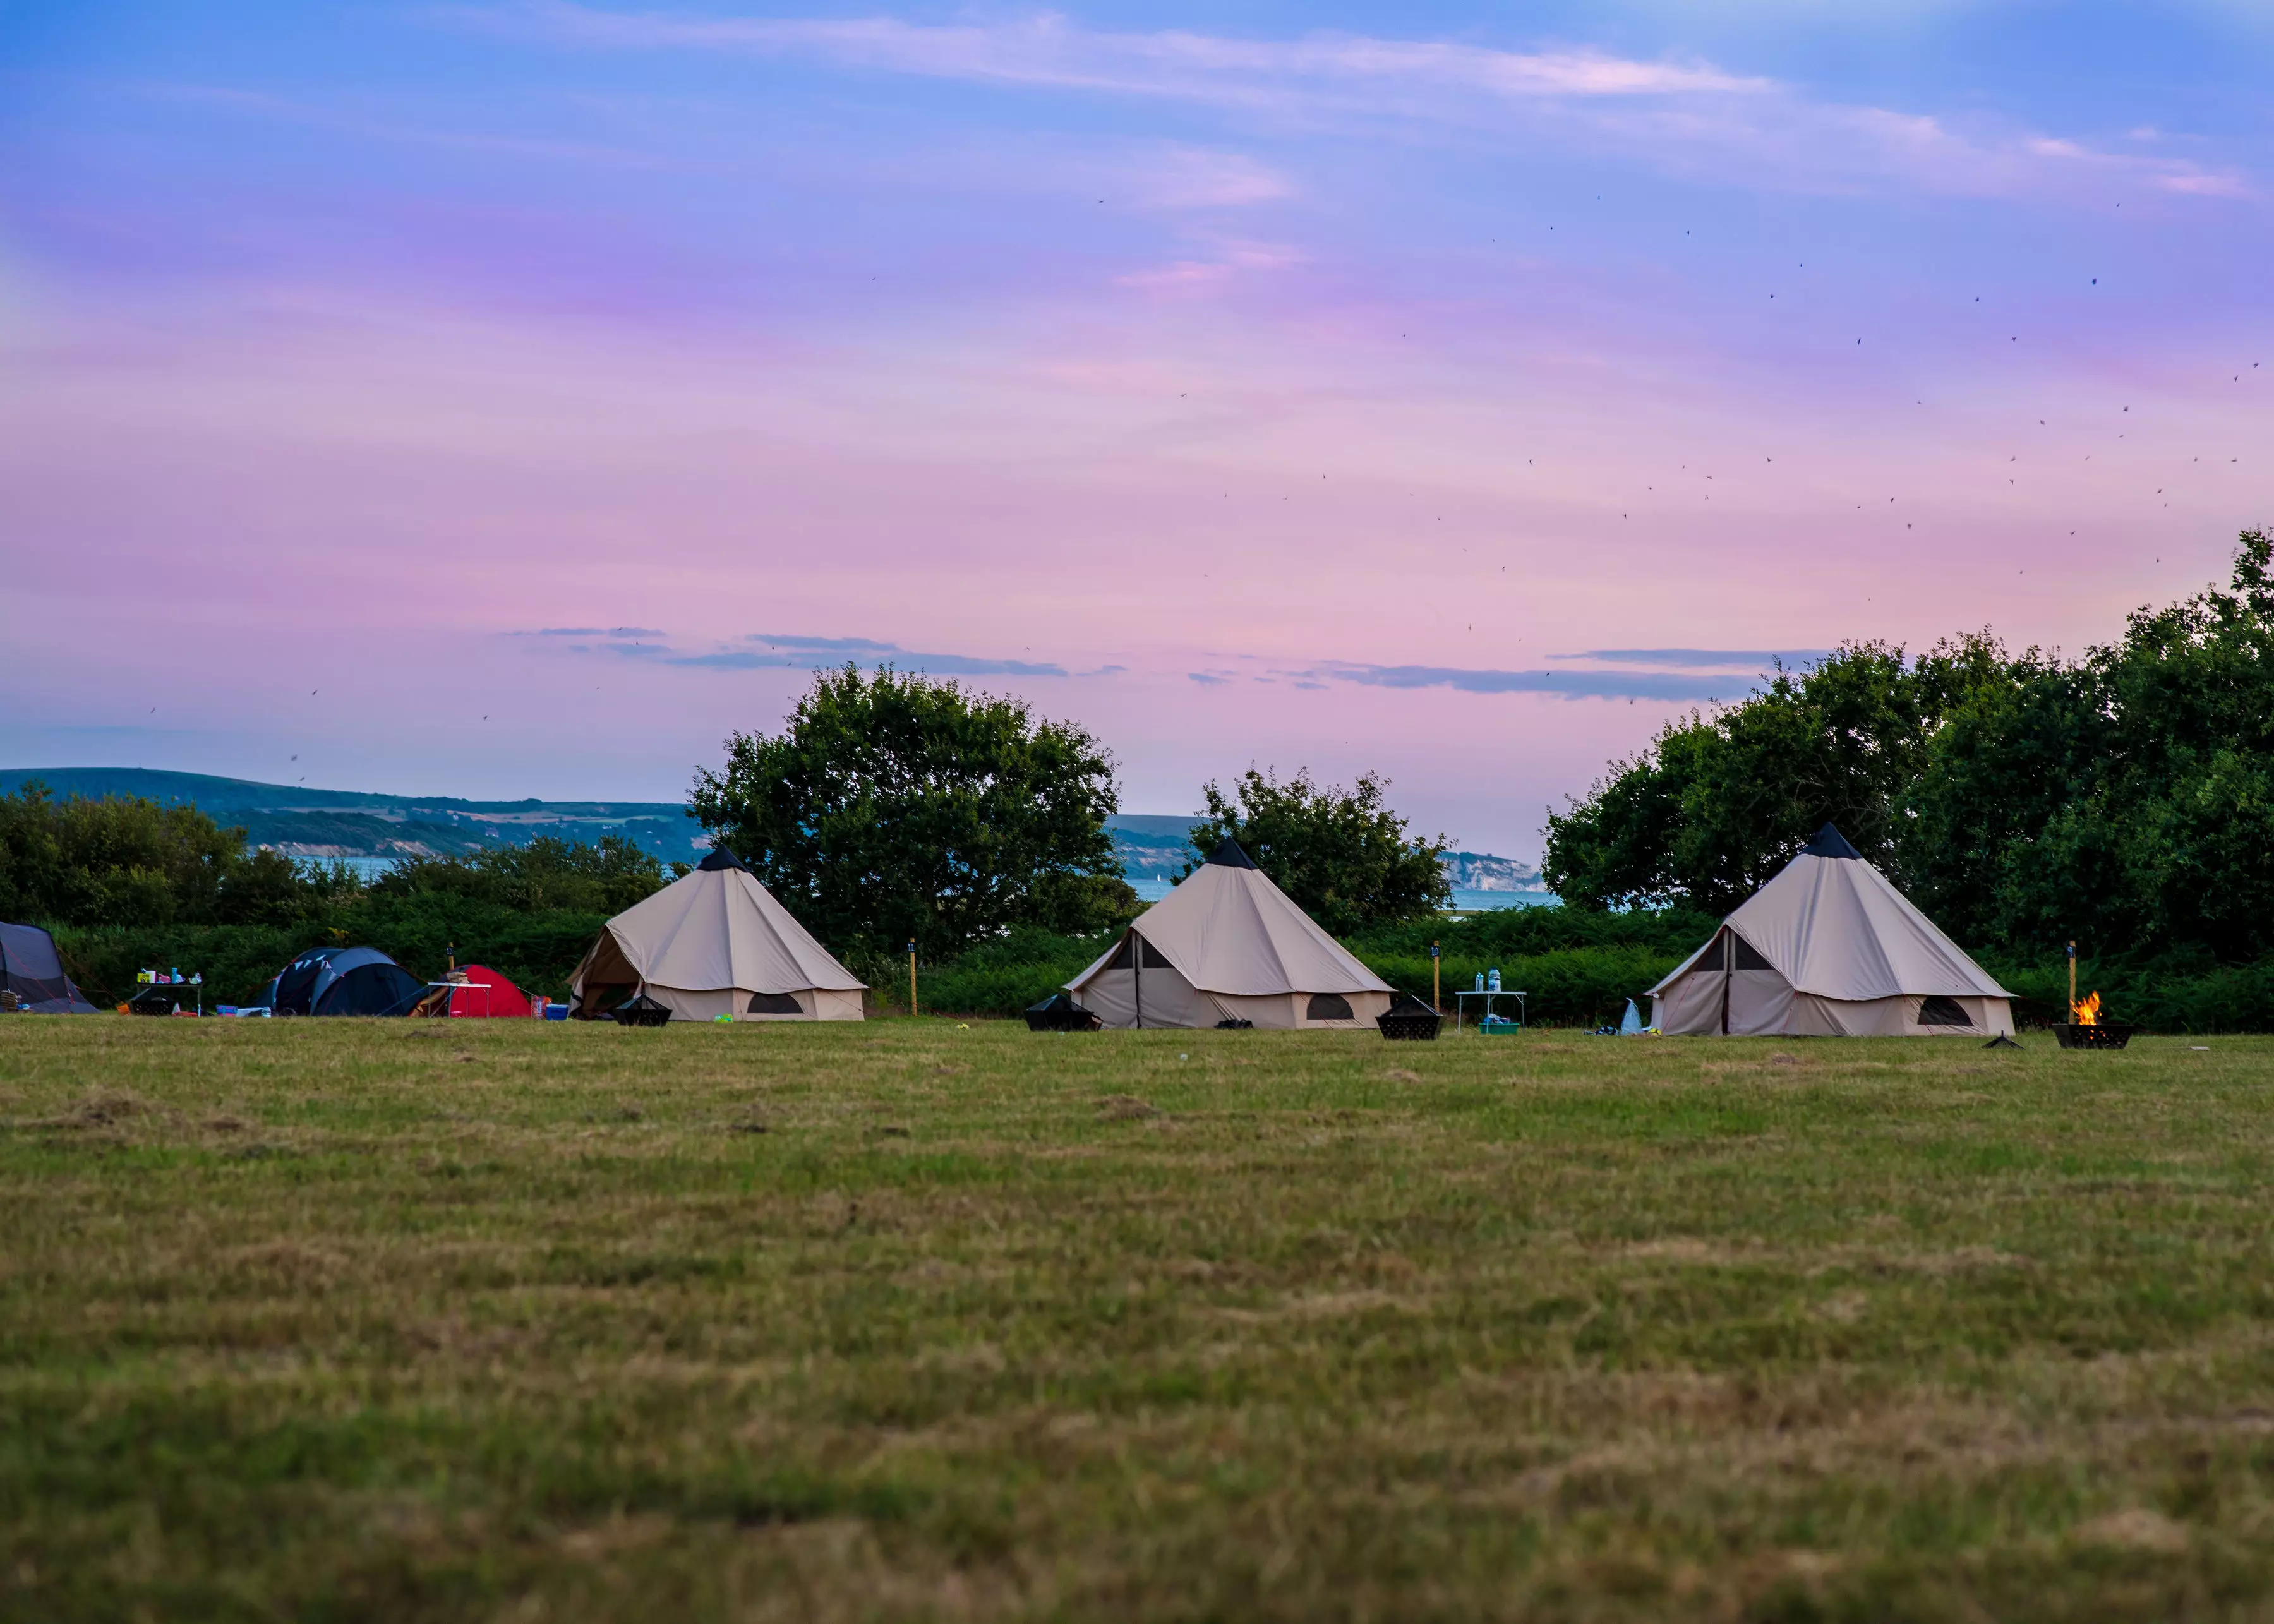 There are glamping and camping areas to choose from, as well as the option to pitch your own tent (